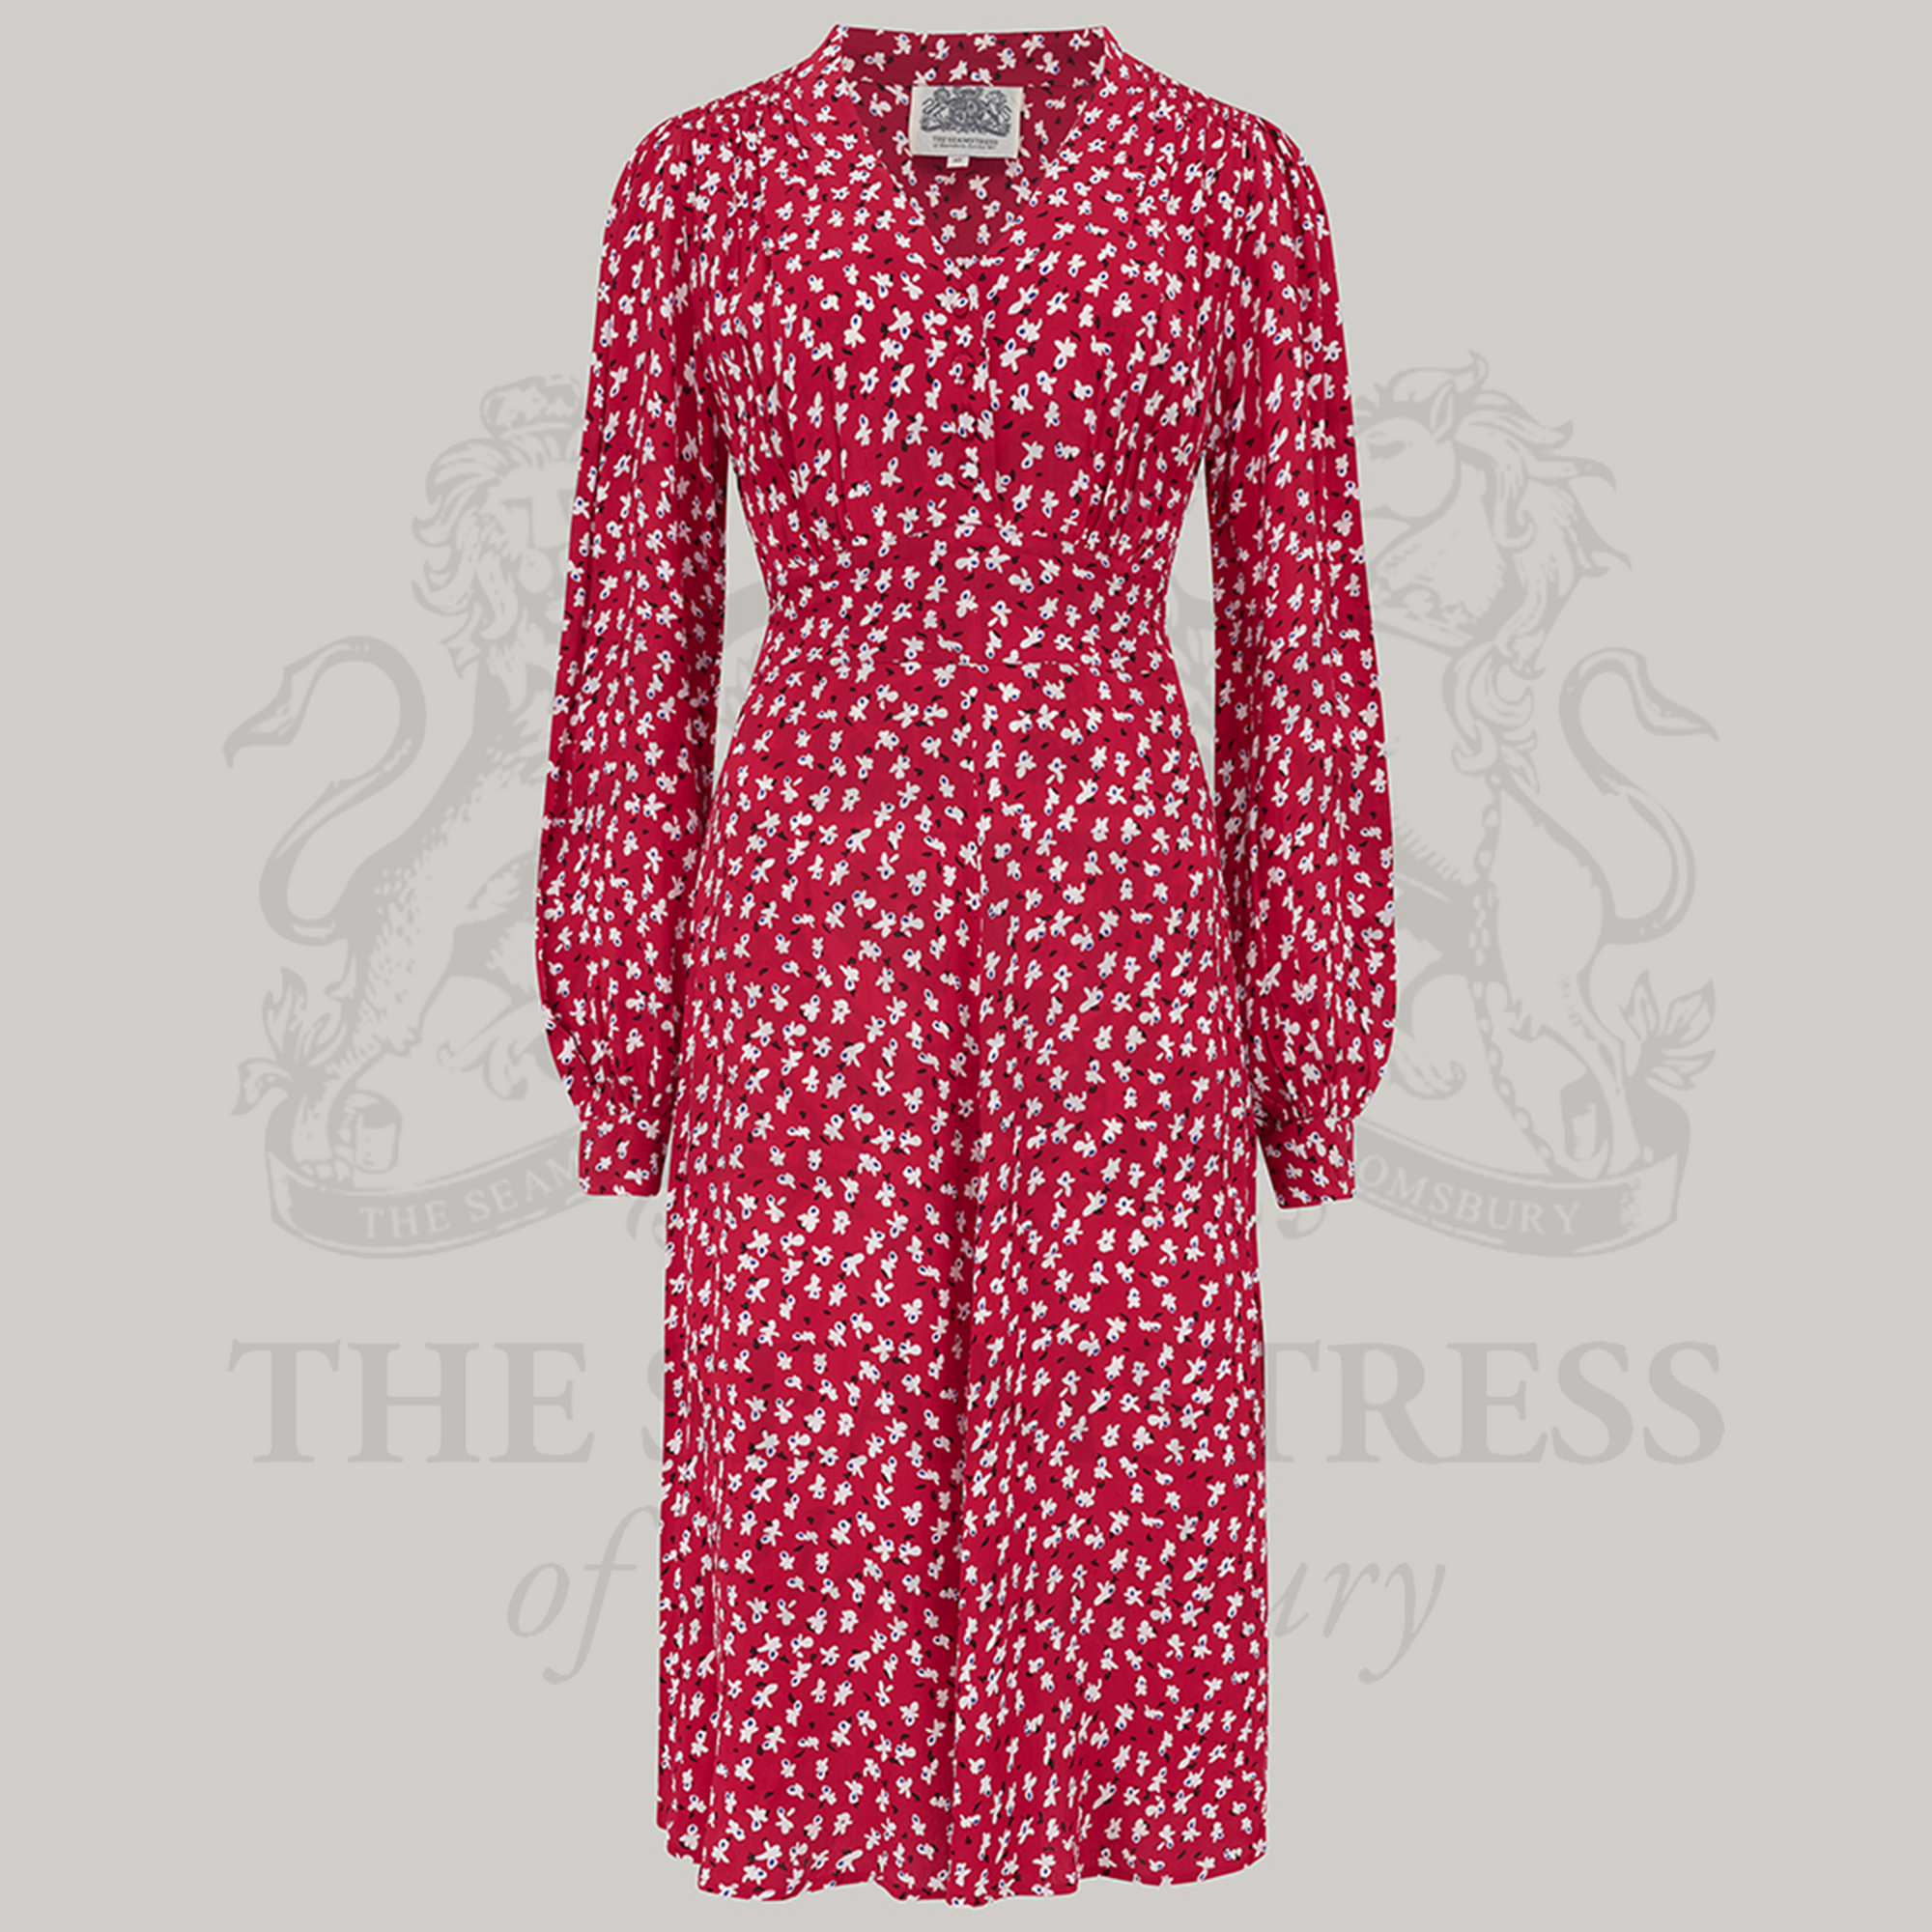 A 1940s style long sleeve dress in red with small clove patterns. Featuring gauged-in top yoke detailing on the shoulders and sleeves that puff out fully at the cuff. 4 small buttons down the front of the dress, and a tie-waist belt. 